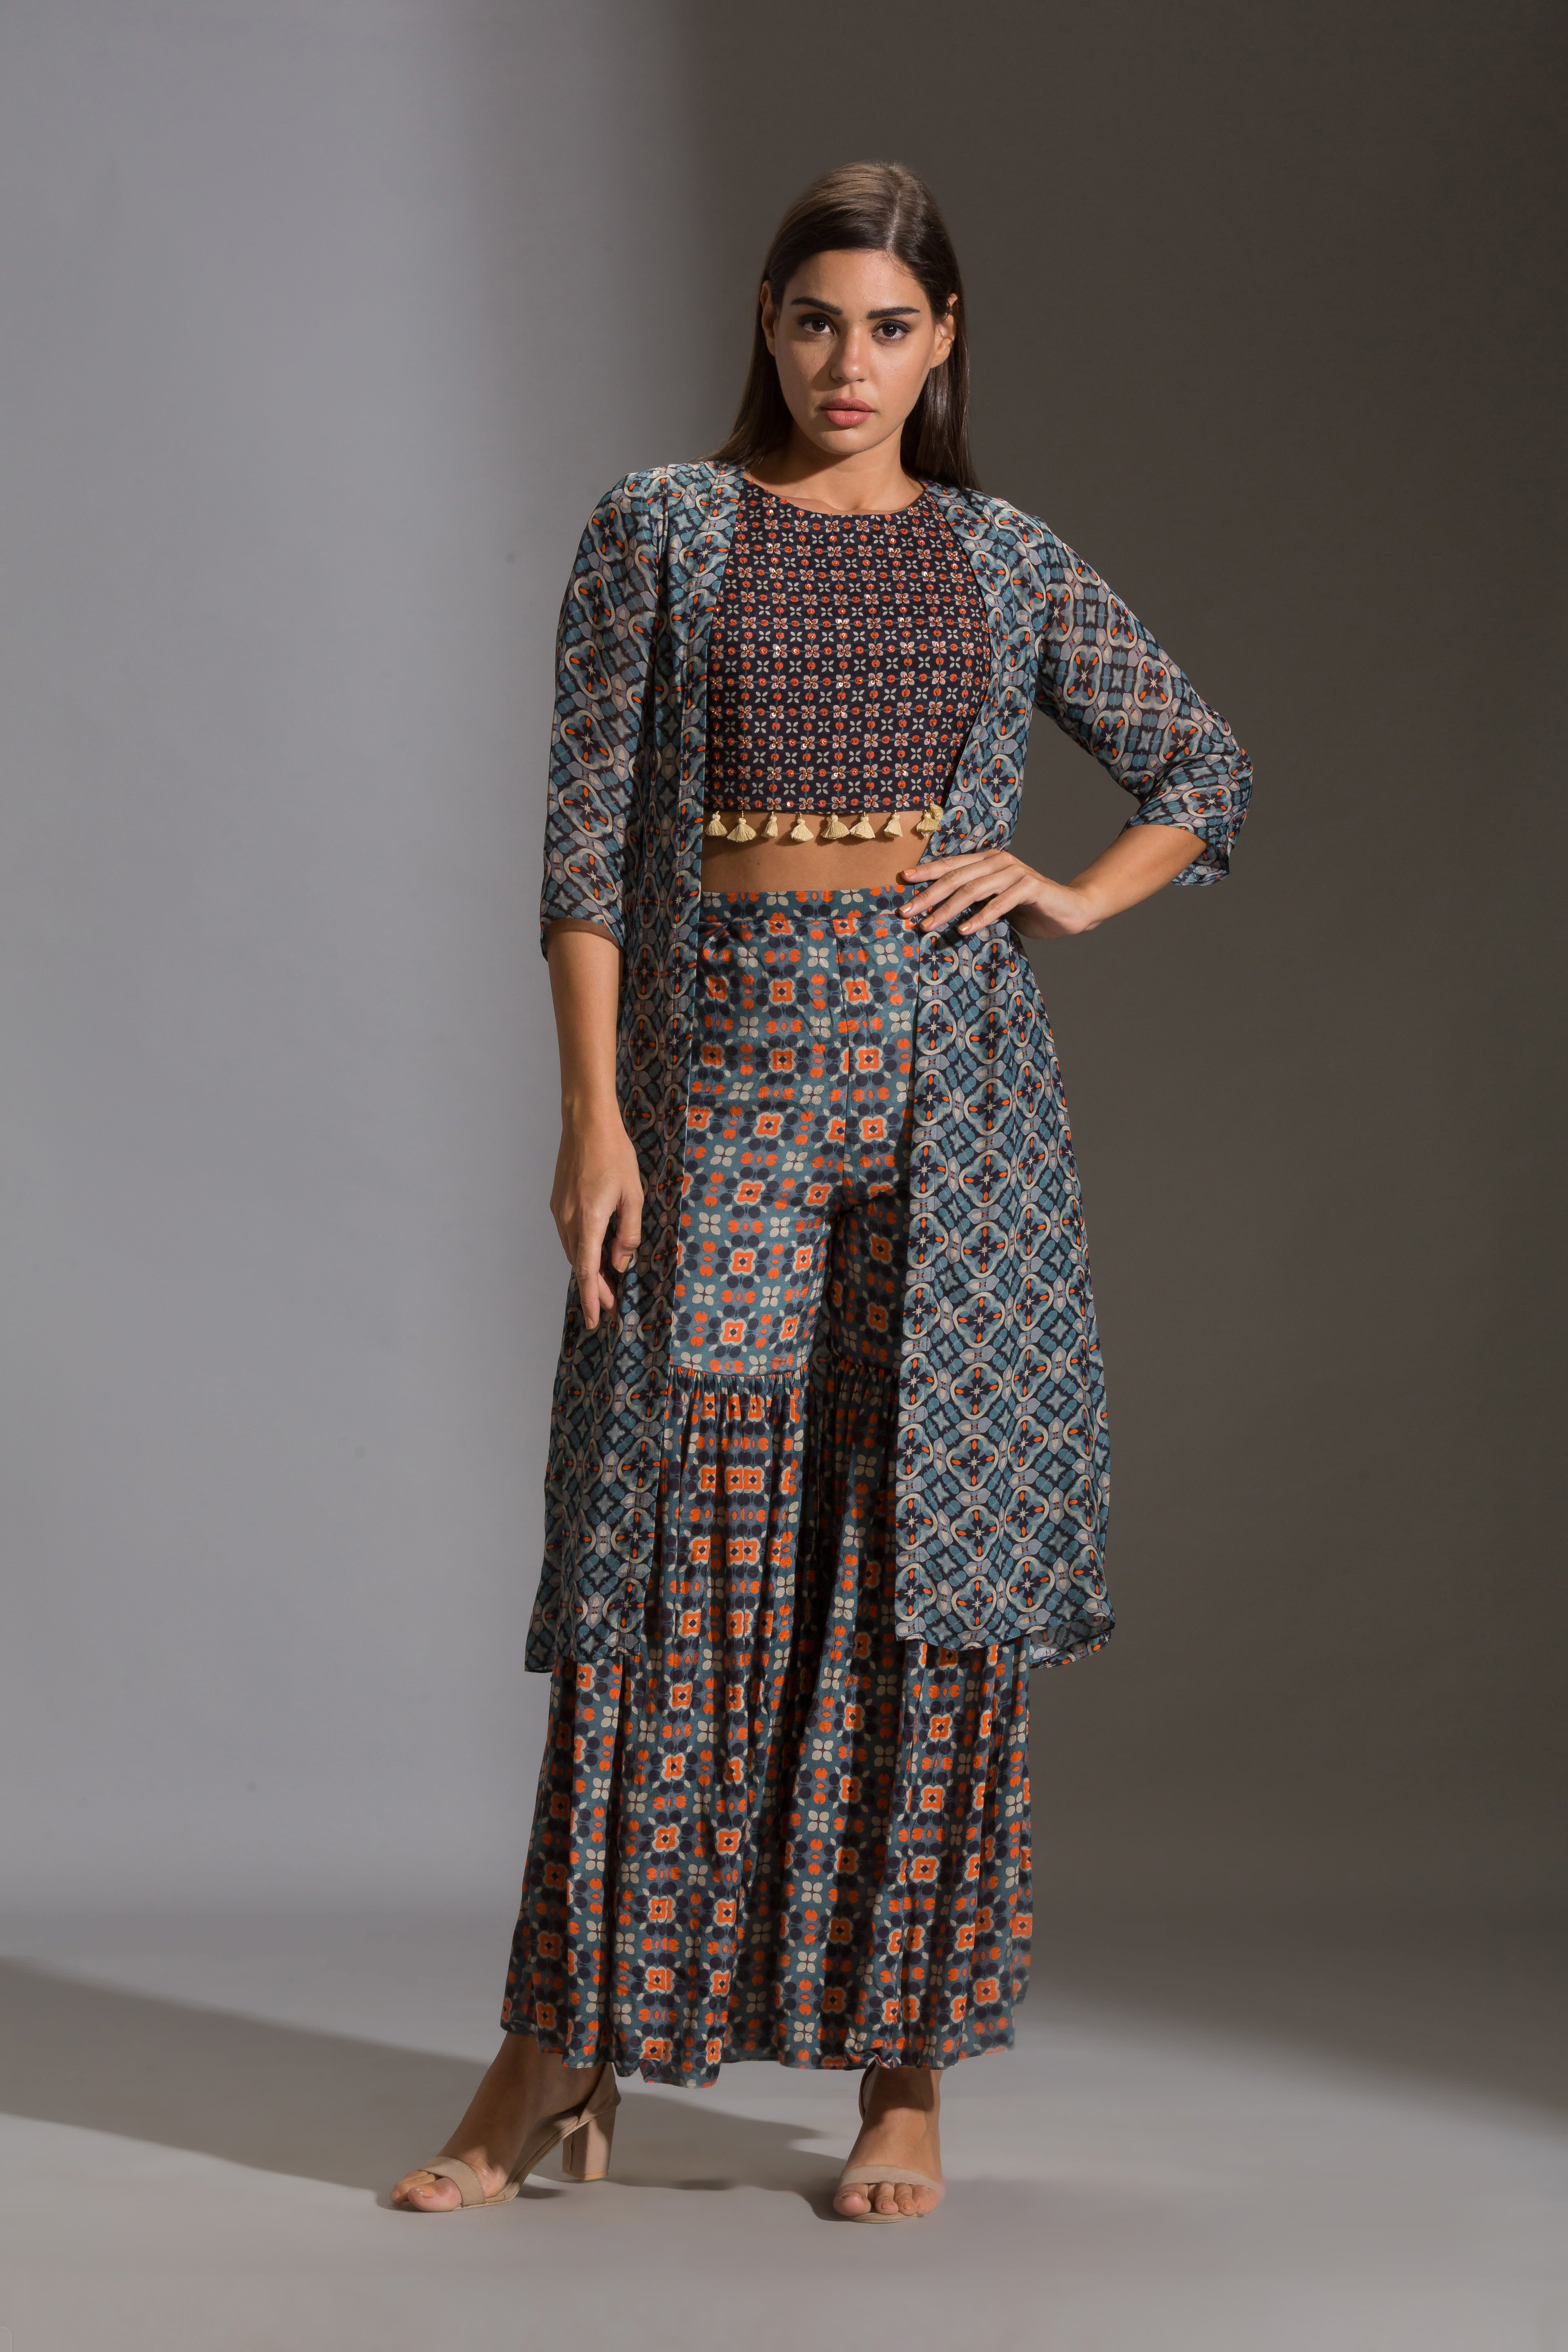 Arabesque Geometrical Printed Sharara With Top And Jacket